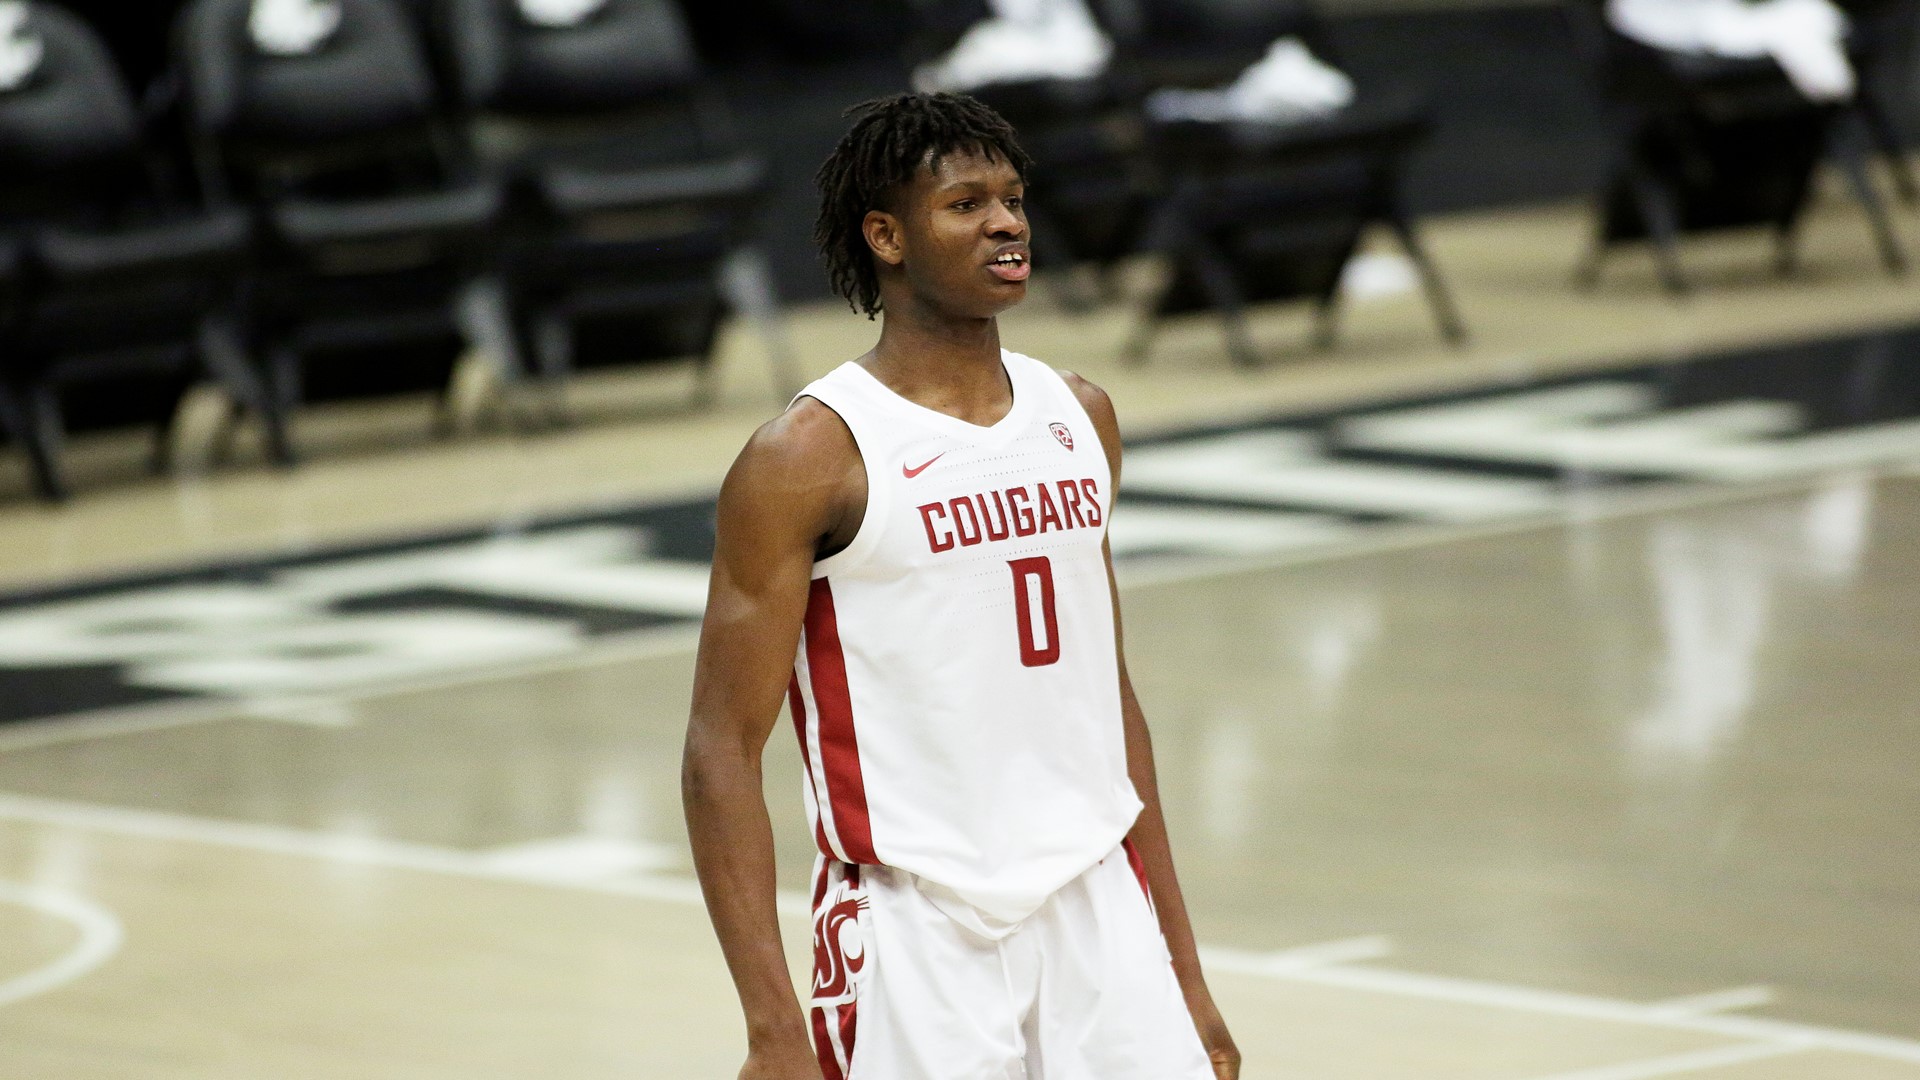 The WSU big announced three days ago that he was declaring for the NBA Draft but maintaining his collegiate eligibility.